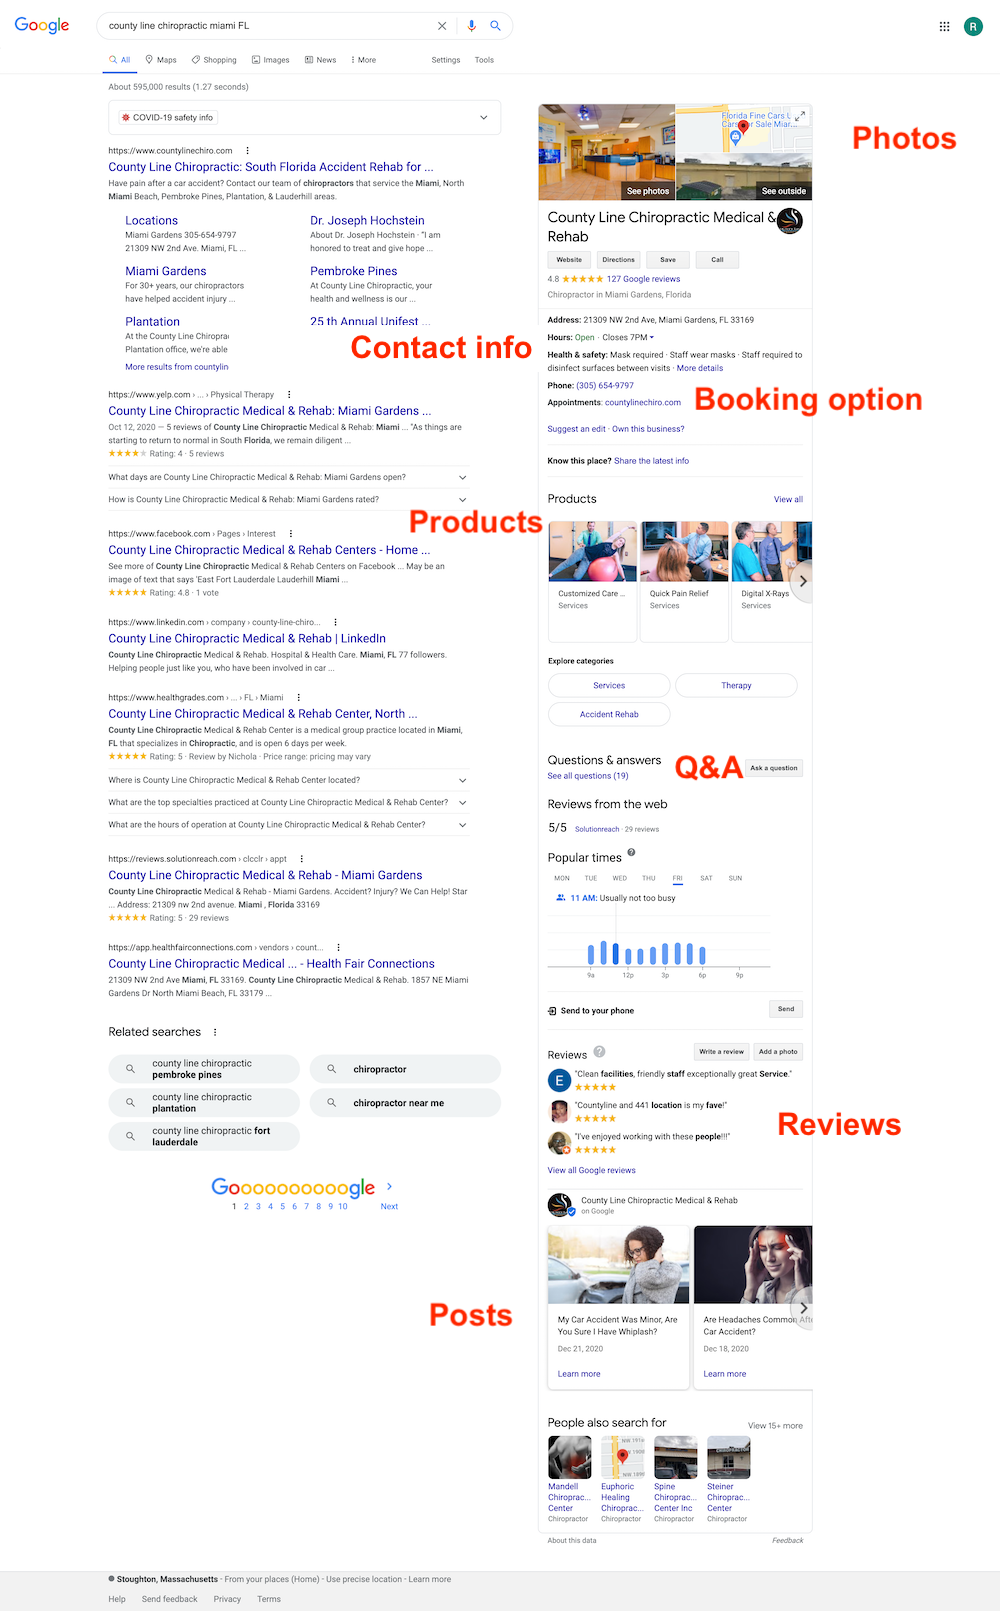 how to rank your business higher on google complete GMB profile